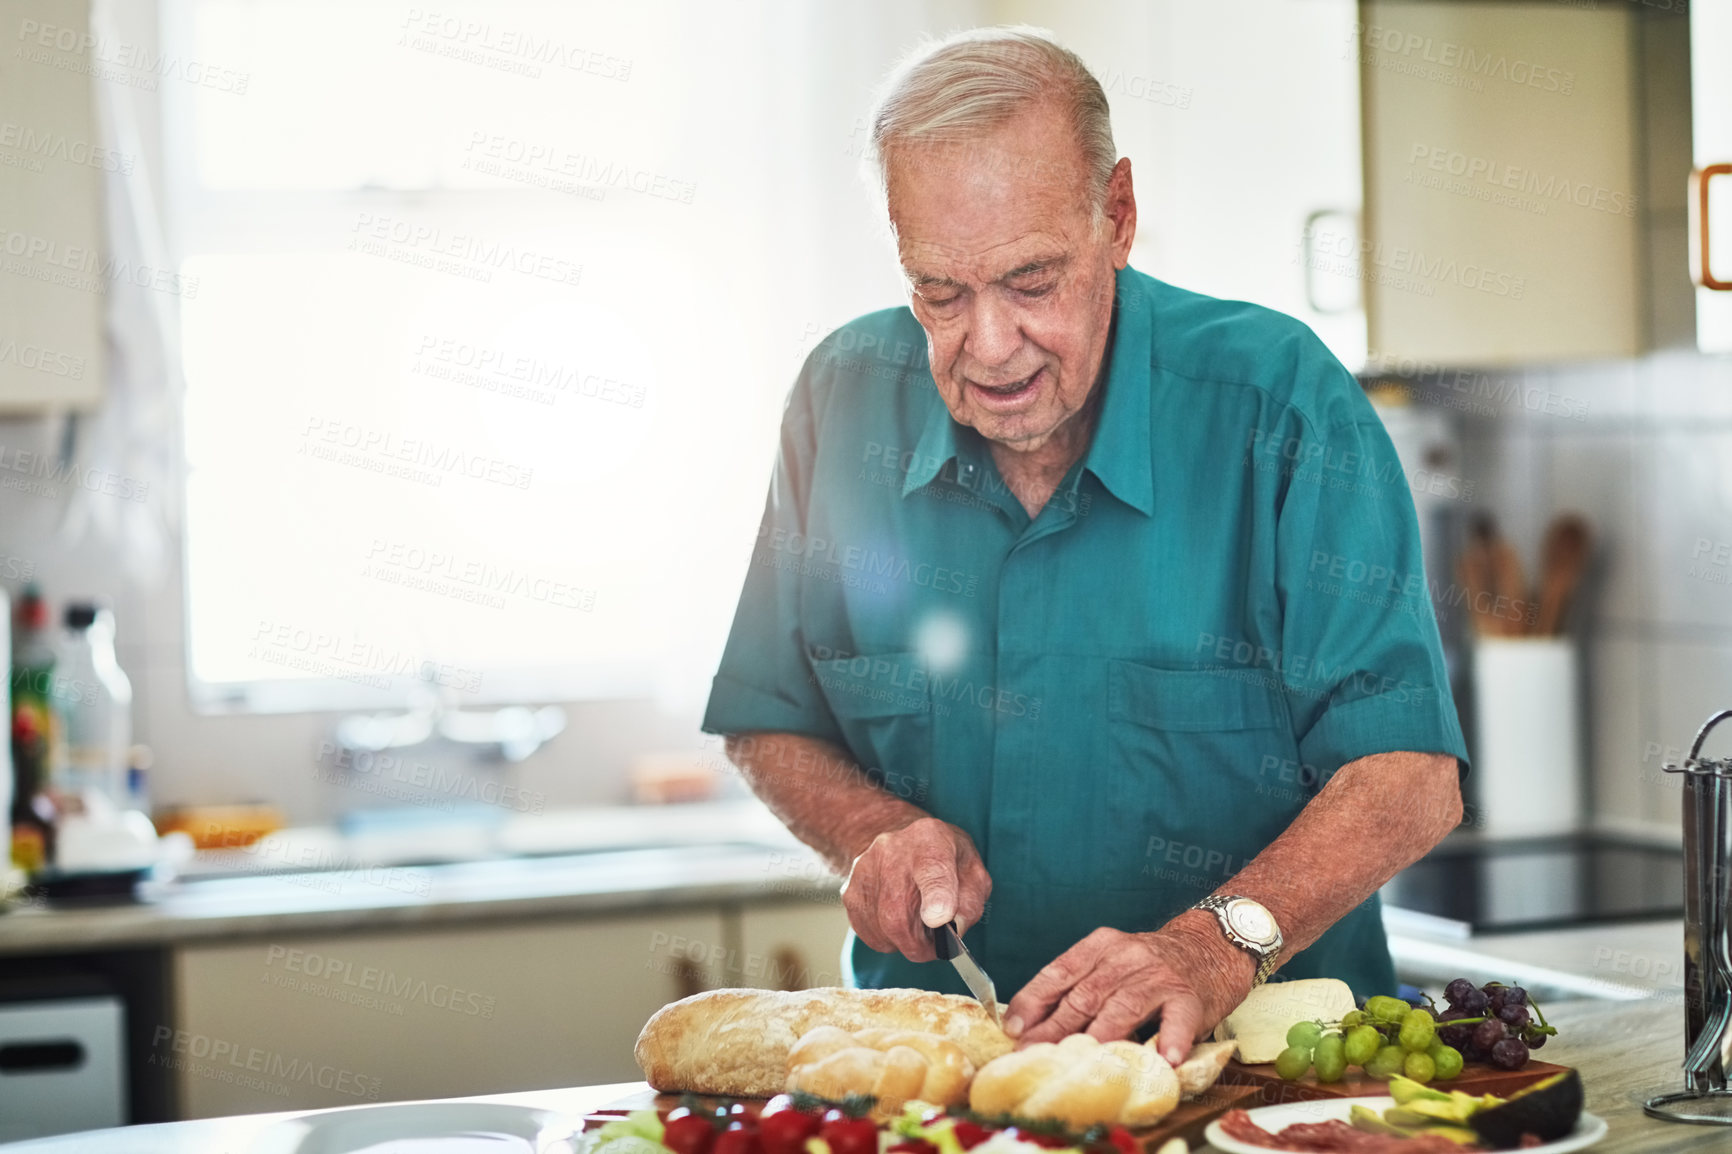 Buy stock photo Cropped shot of a senior man making lunch in his kitchen at home